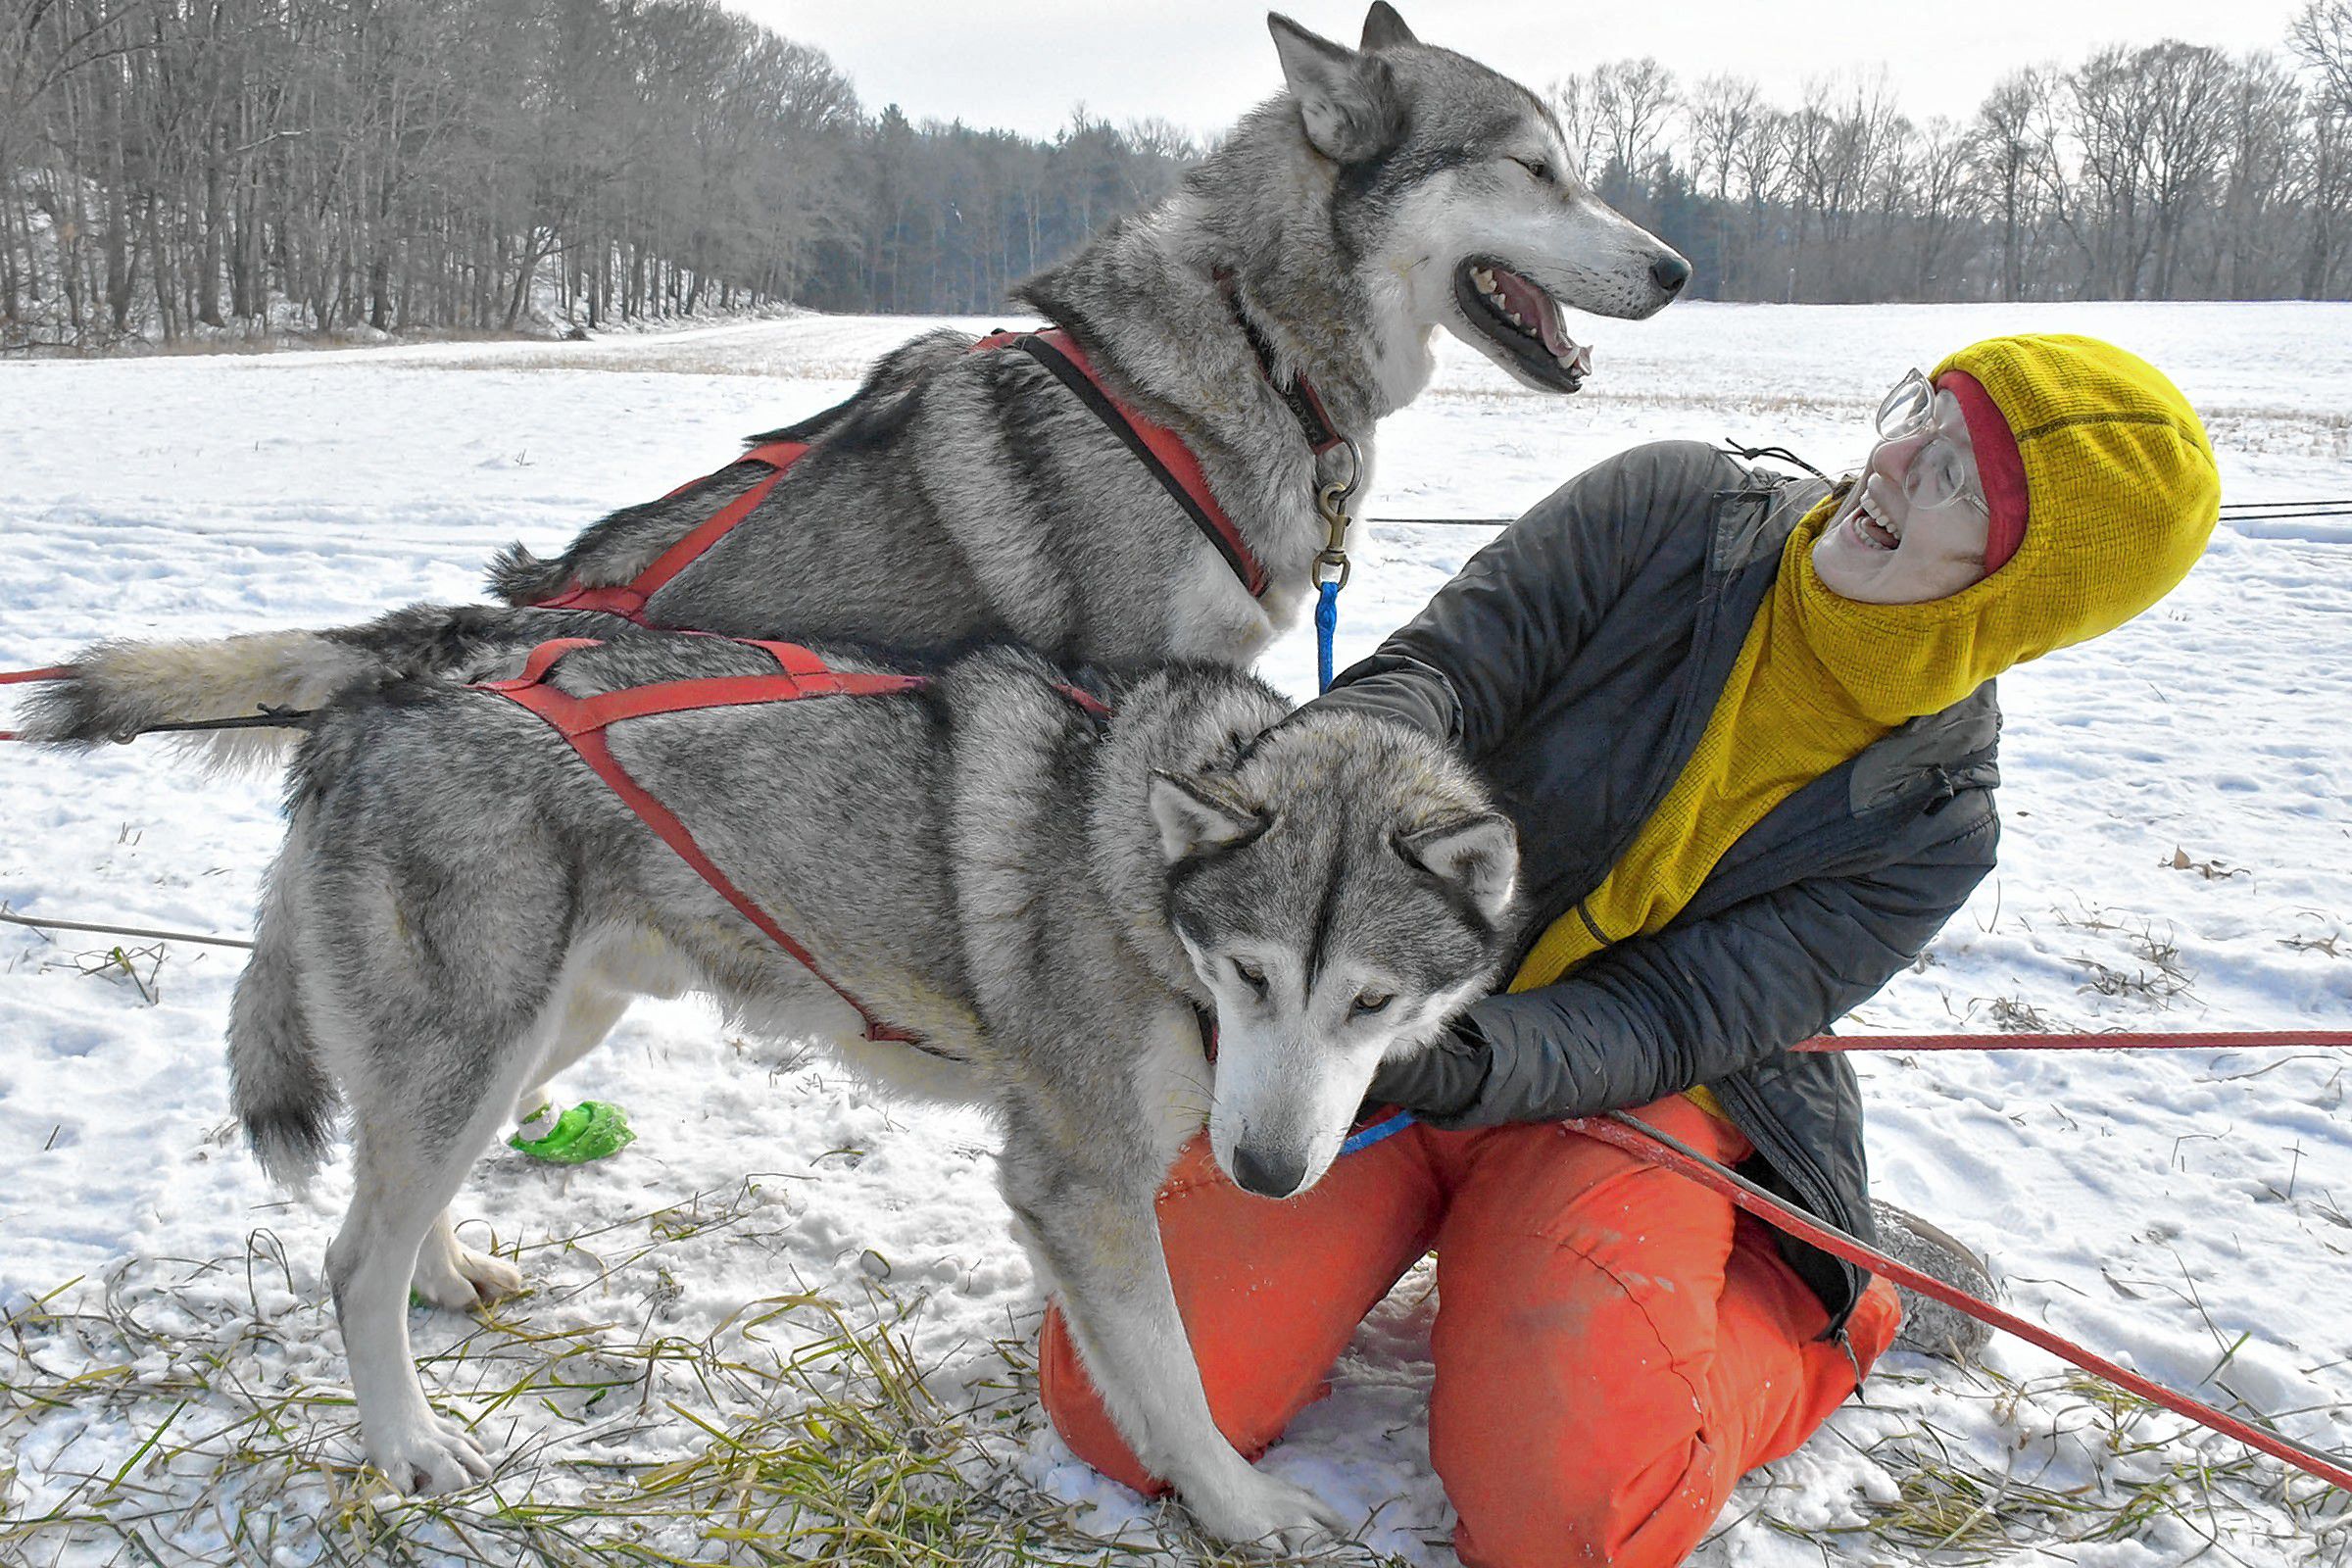 Mushing intern Crystal Whyte, of Rochester, N.Y., plays with Jetfire while Tanka, above, begs for attention while doing a day of excursion trips with Braeburn Siberians of Windsor, Vt., along the Connecticut River in Claremont, N.H., on Sun. Dec. 22, 2019. (Rick Russell photograph)